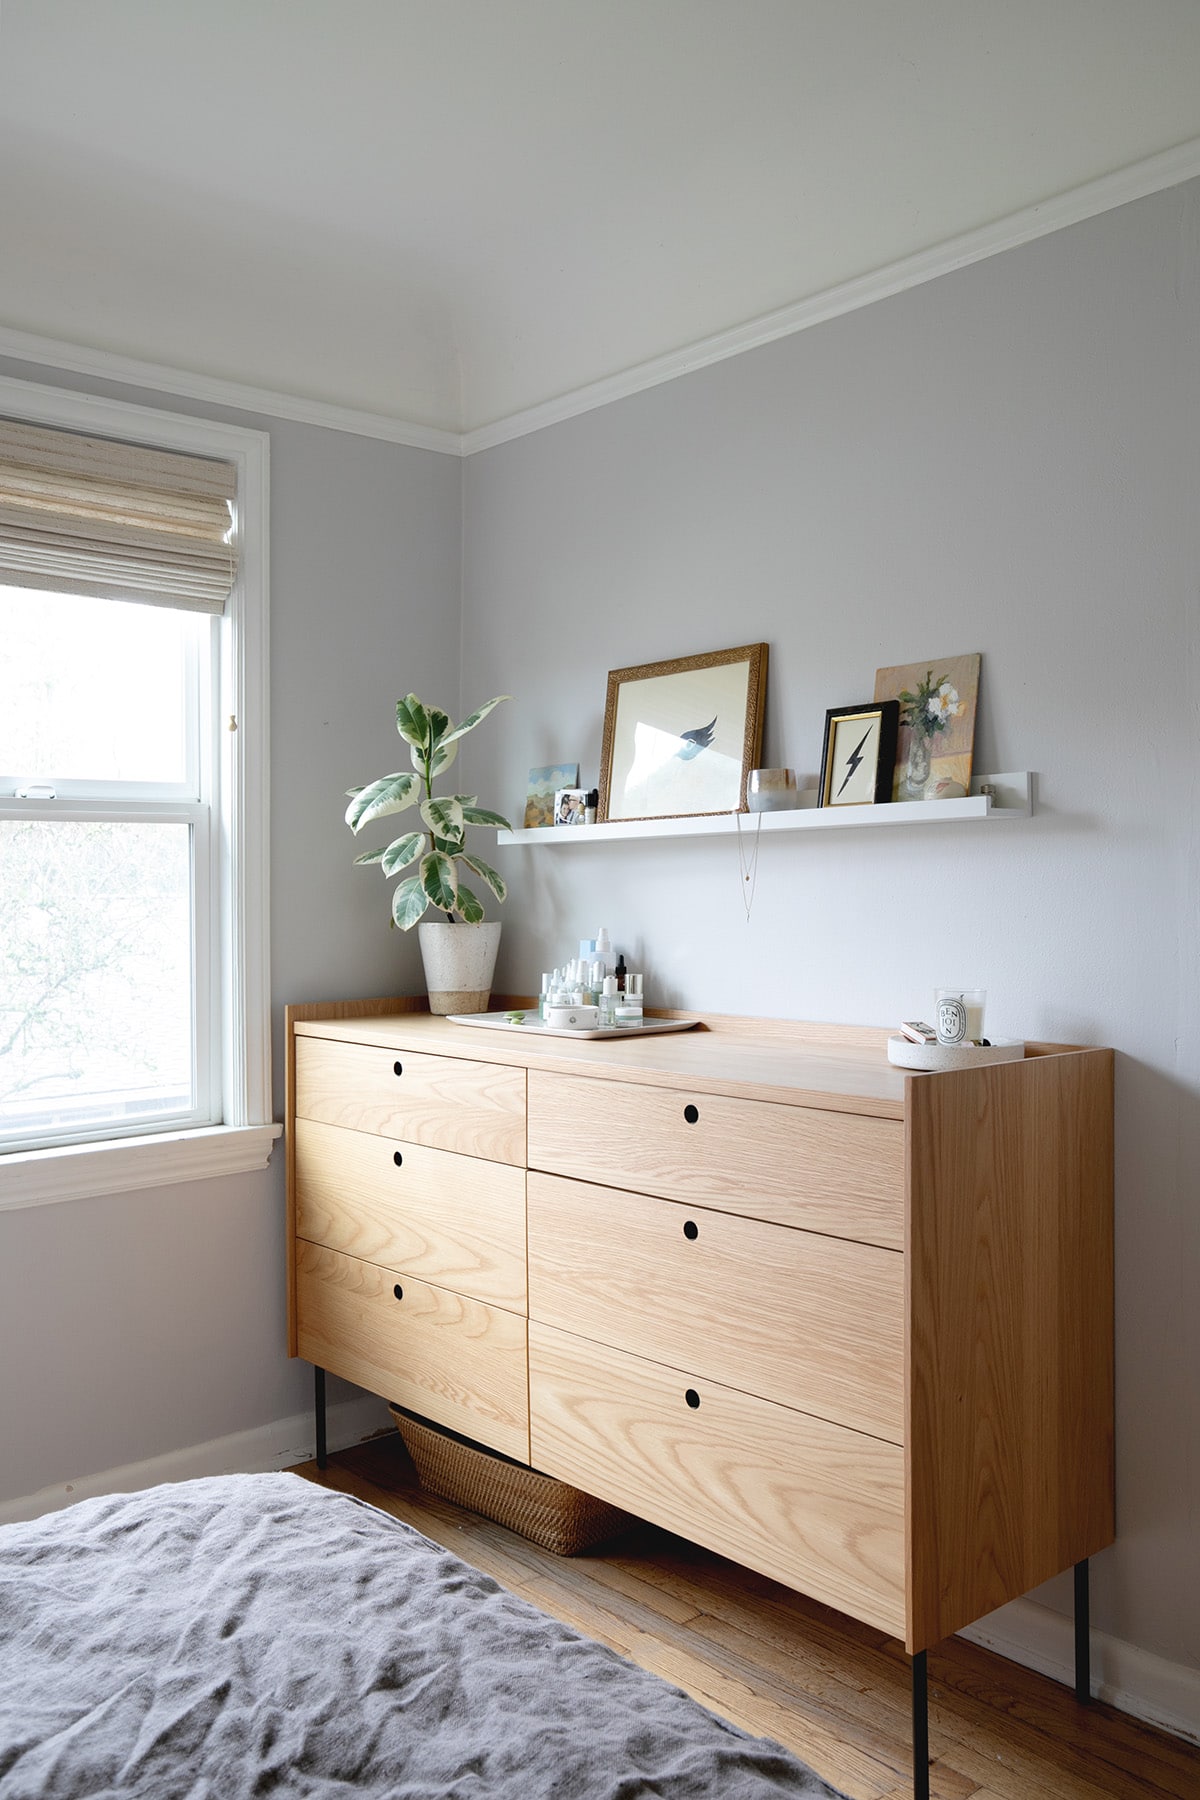 lilac walls and warm wood balance eachother in this tiny master bedroom makeover